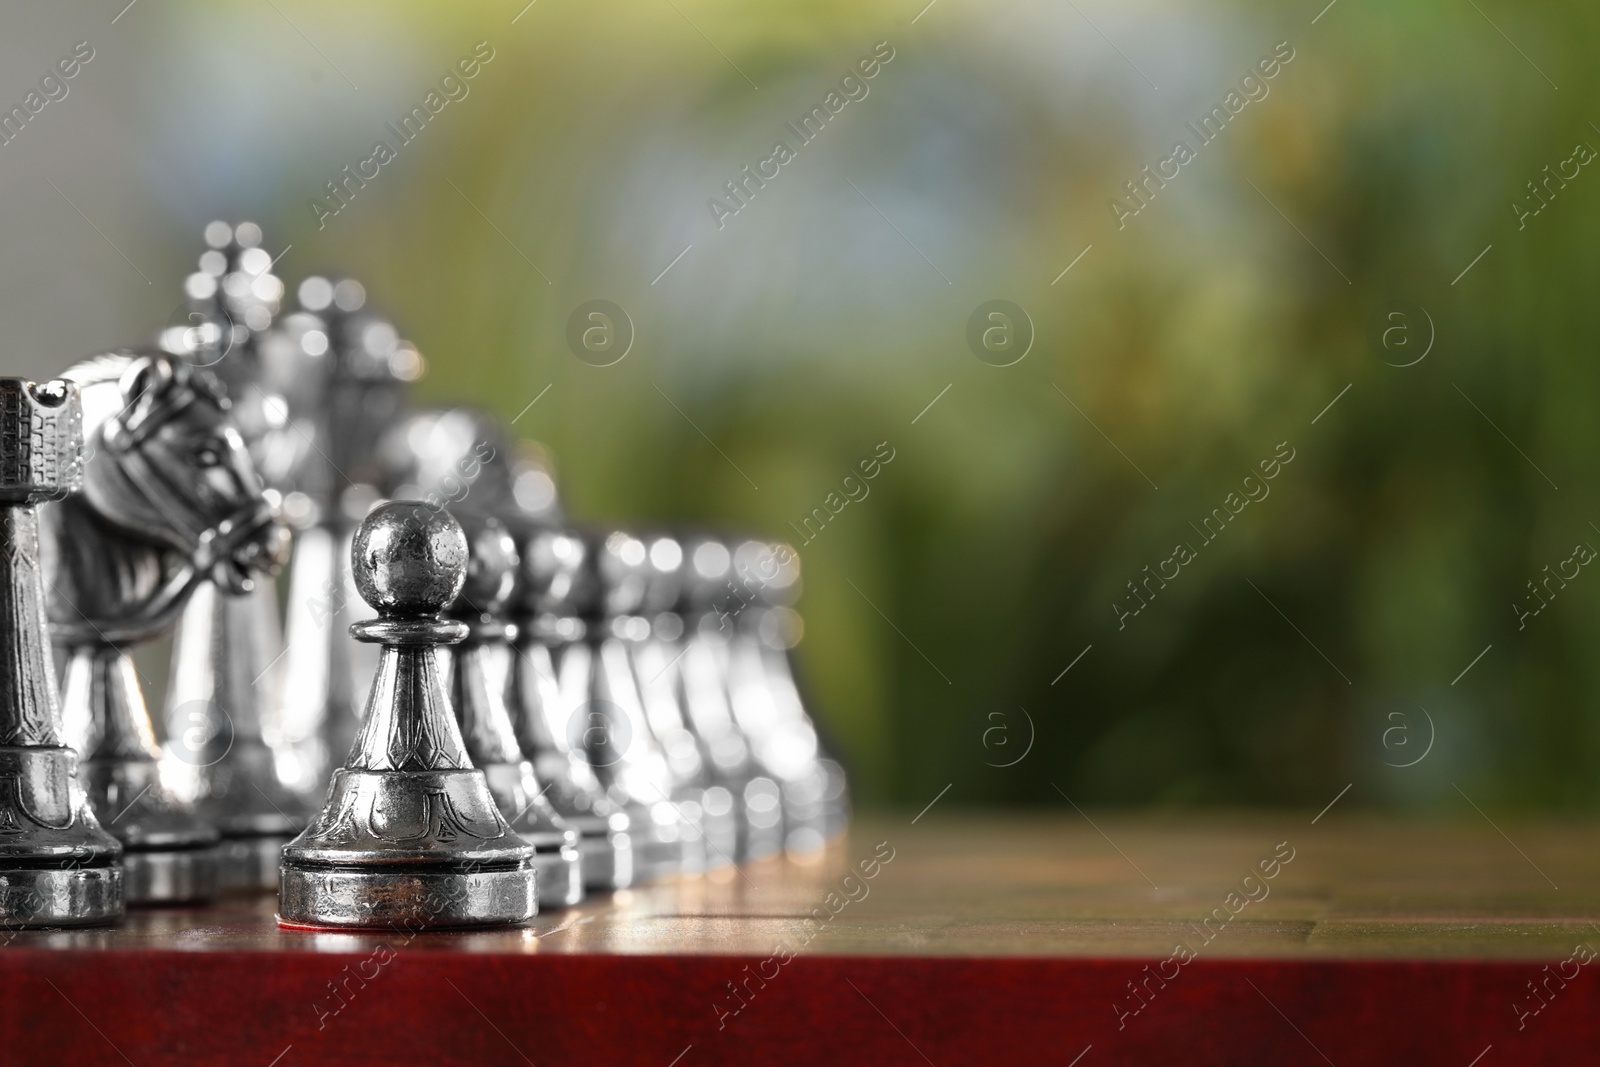 Photo of Silver chess pieces on game board against blurred background, space for text